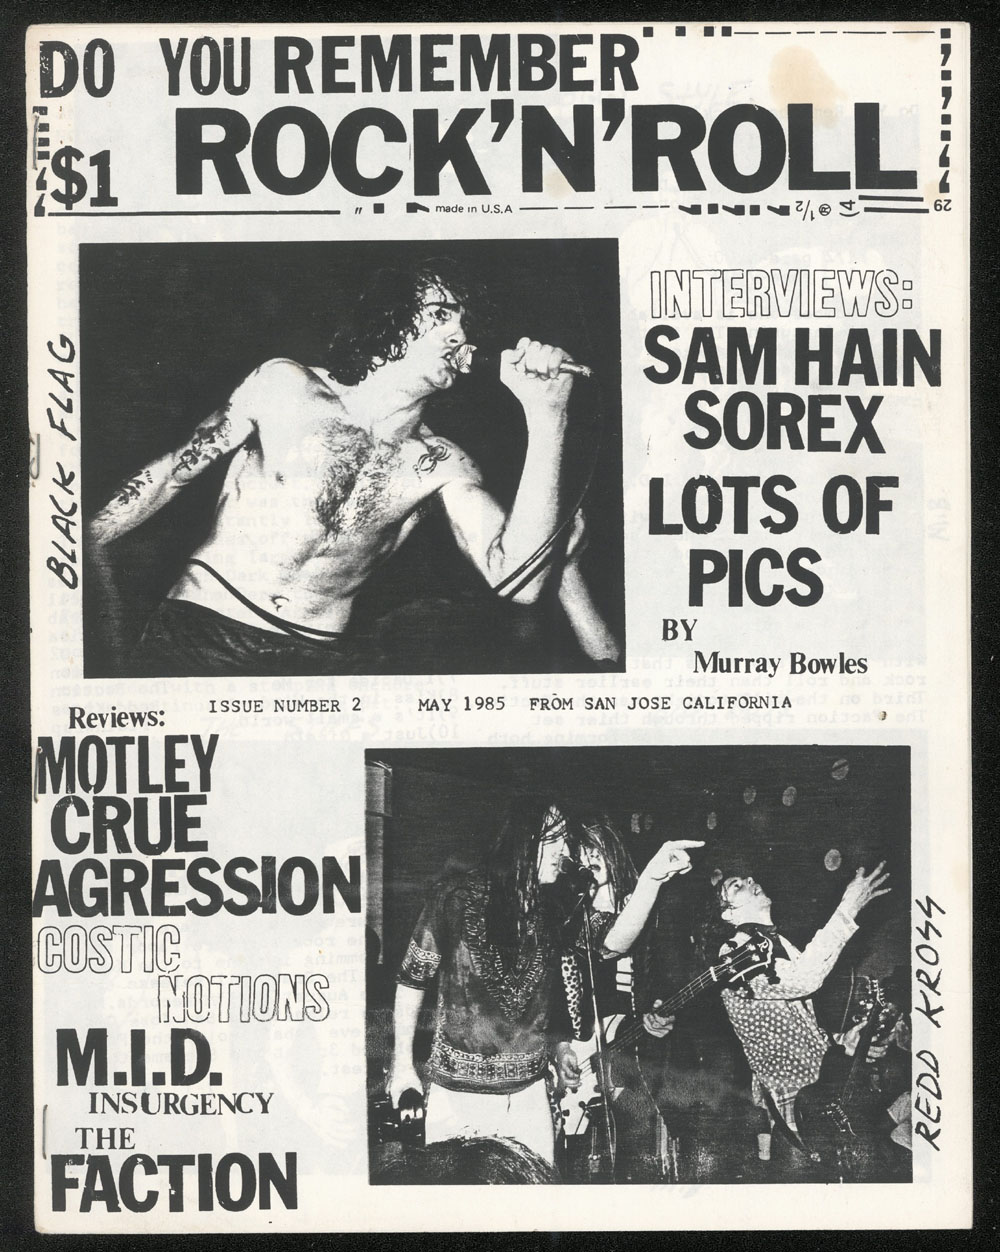 DO YOU REMEMBER ROCK 'N' ROLL #2